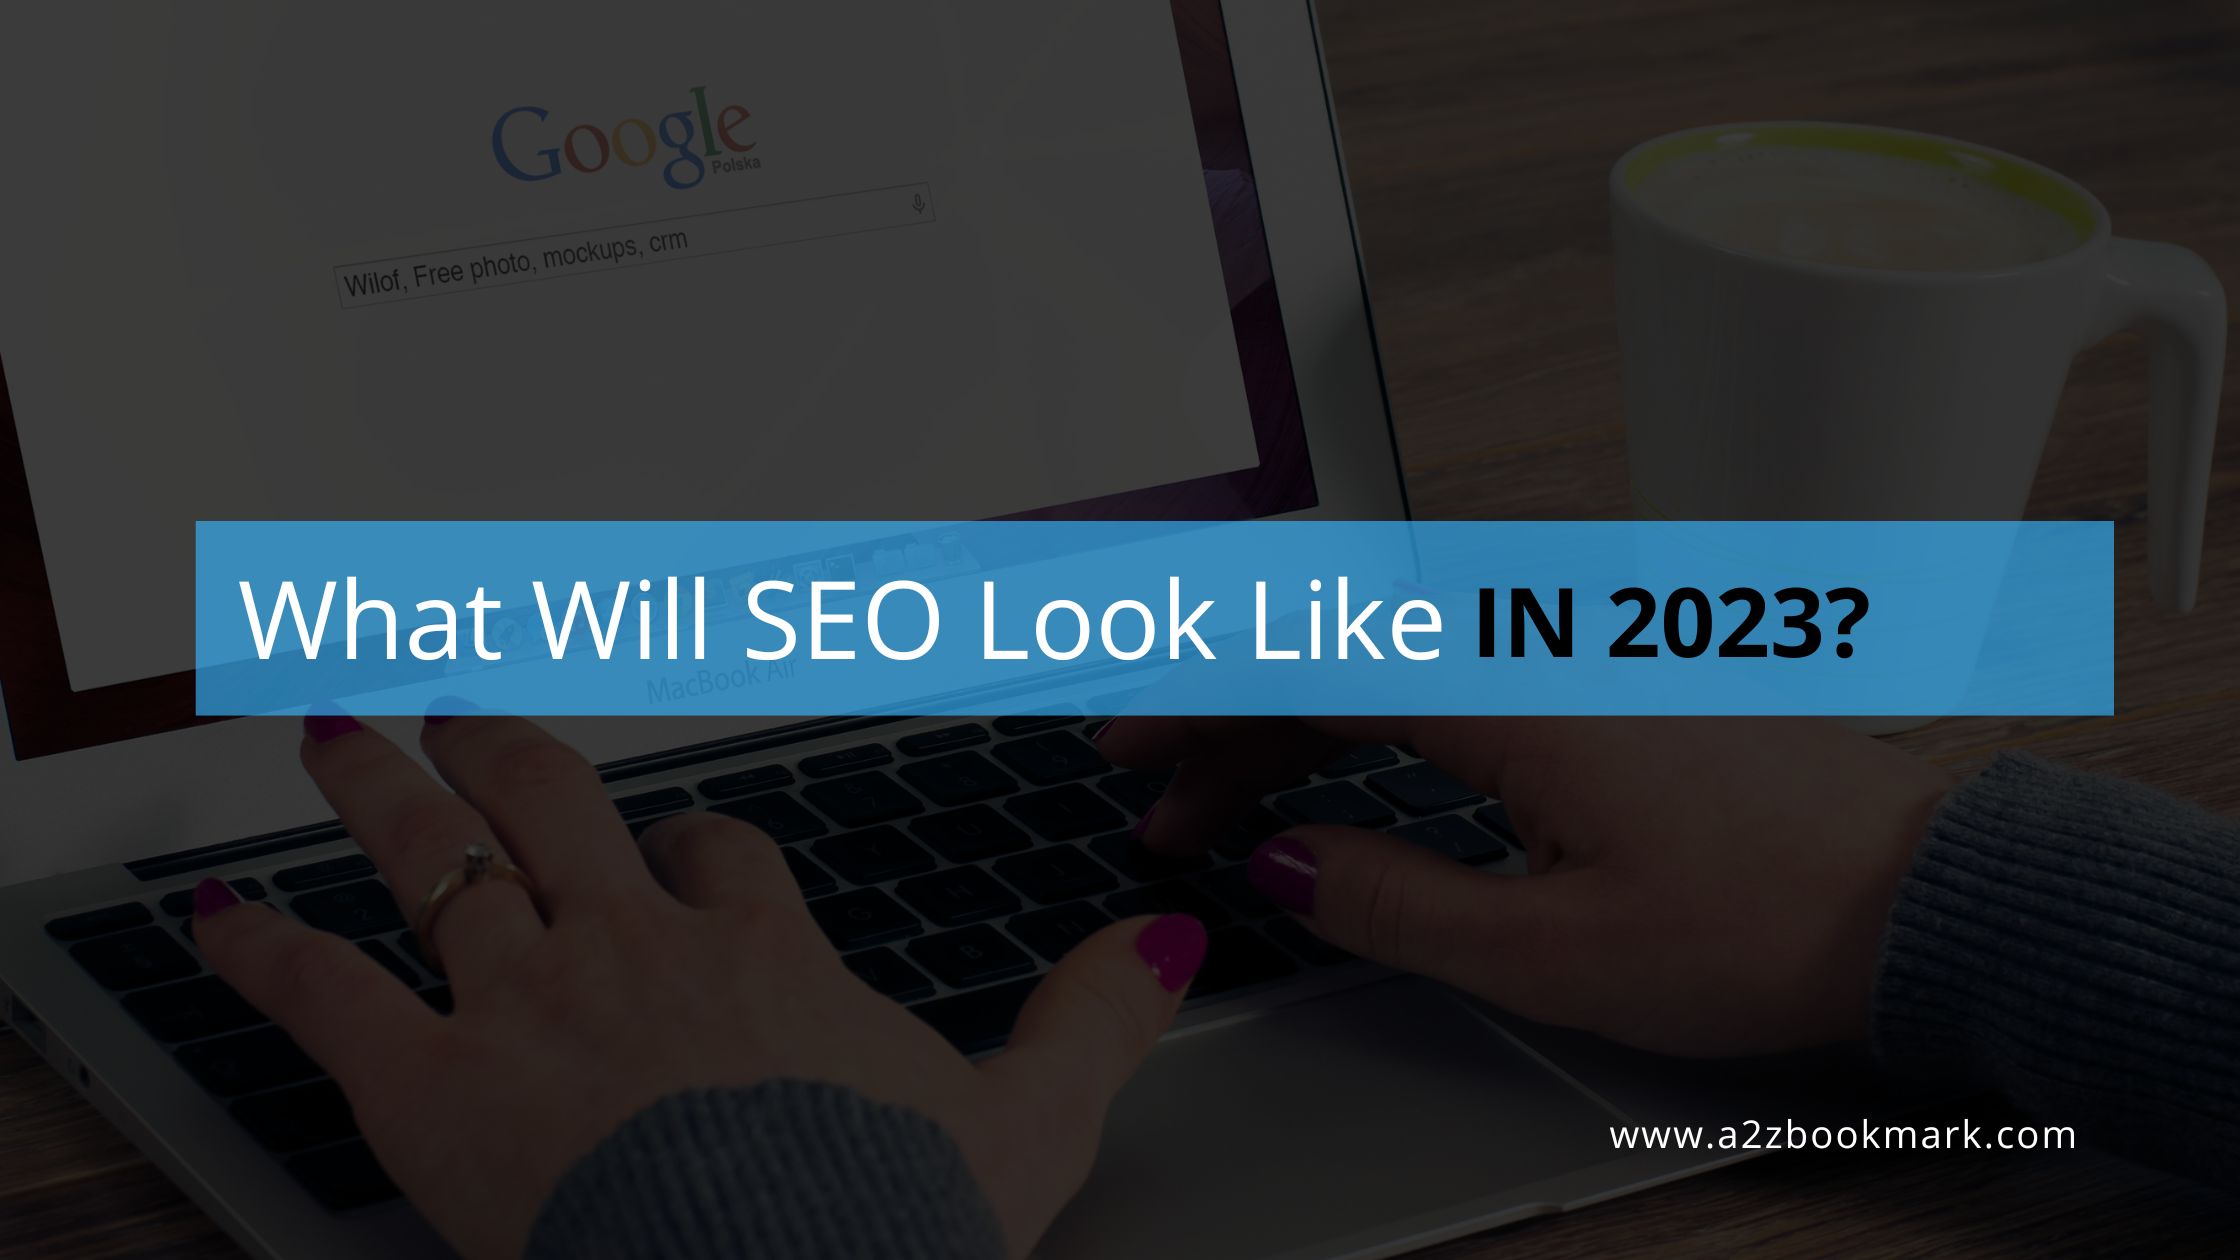 What Will SEO Look Like in 2023?